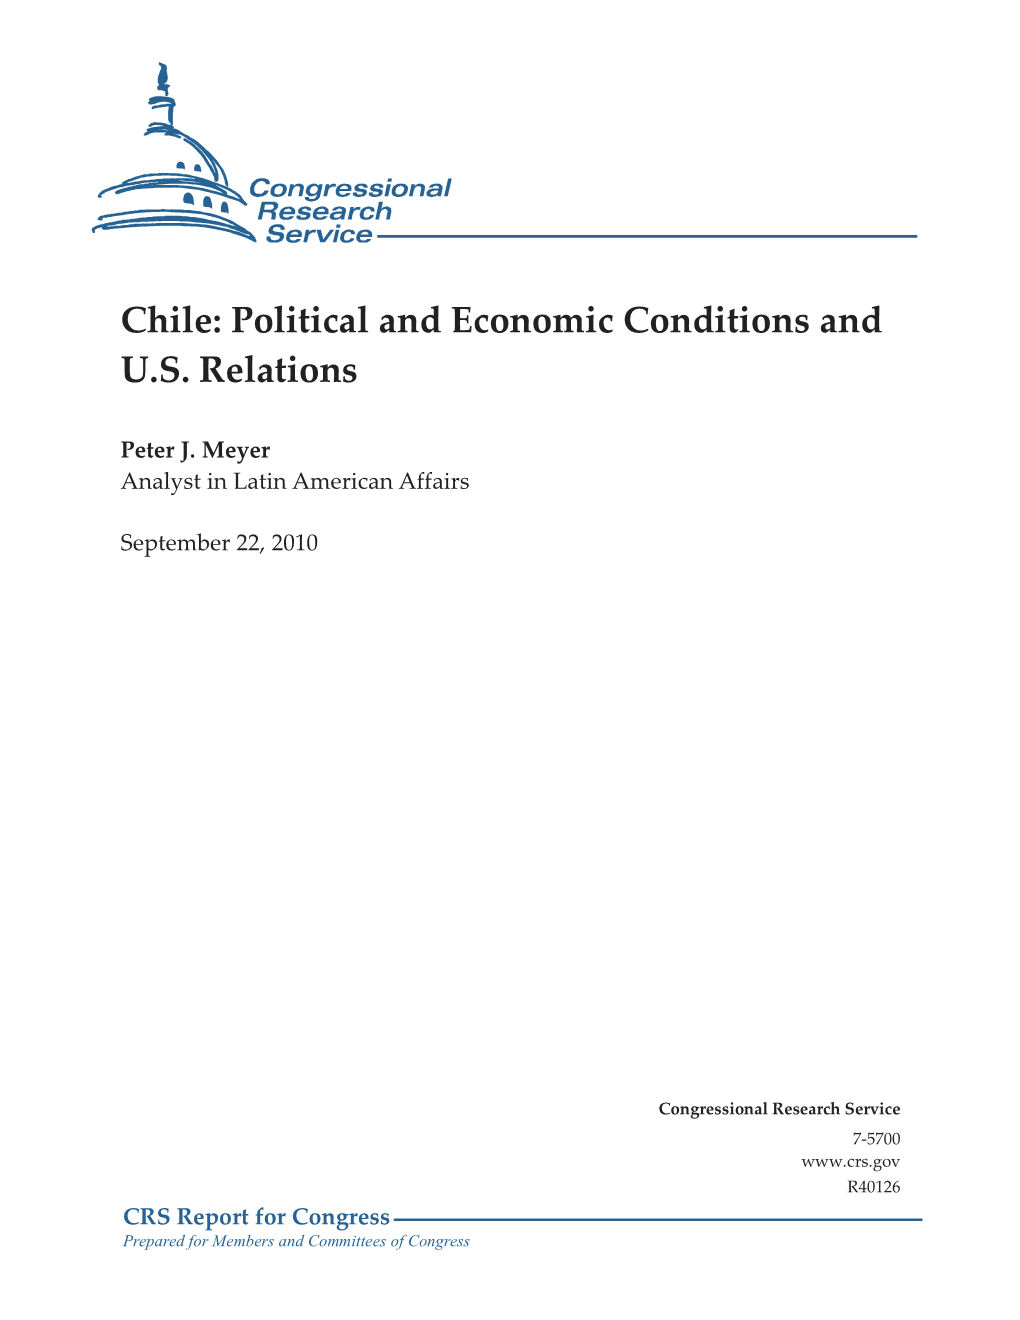 Chile: Political and Economic Conditions and U.S